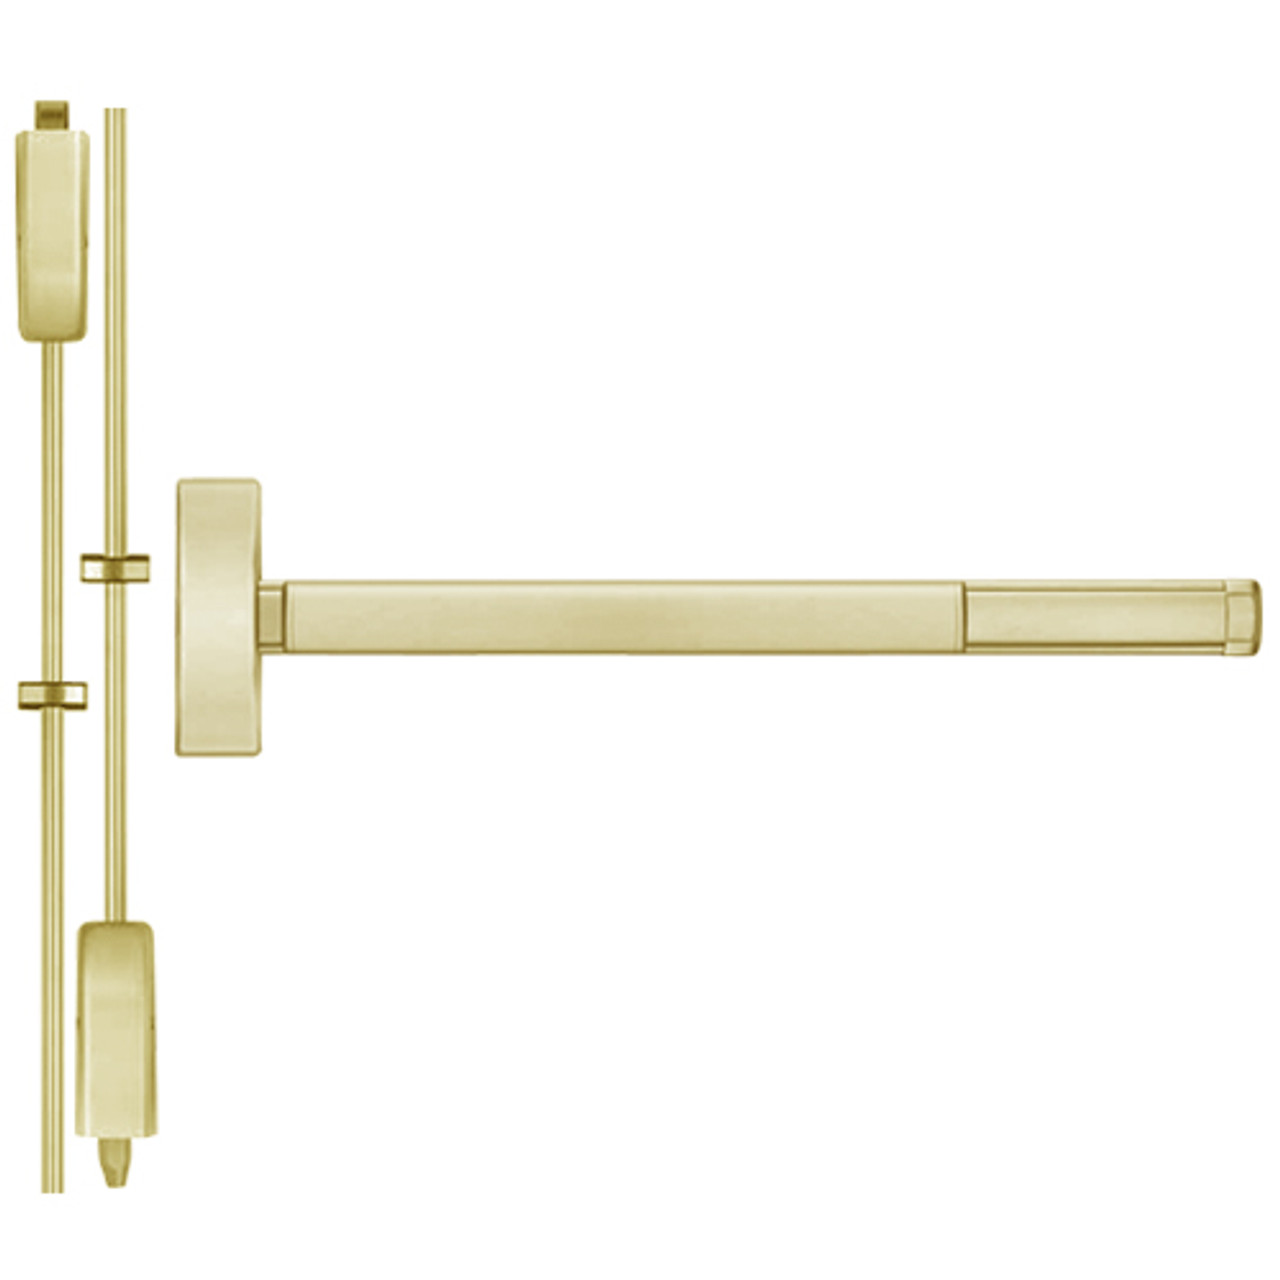 DE2201-606-48 PHI 2200 Series Non Fire Rated Apex Surface Vertical Rod Device with Delayed Egress Prepped for Cover Plate in Satin Brass Finish